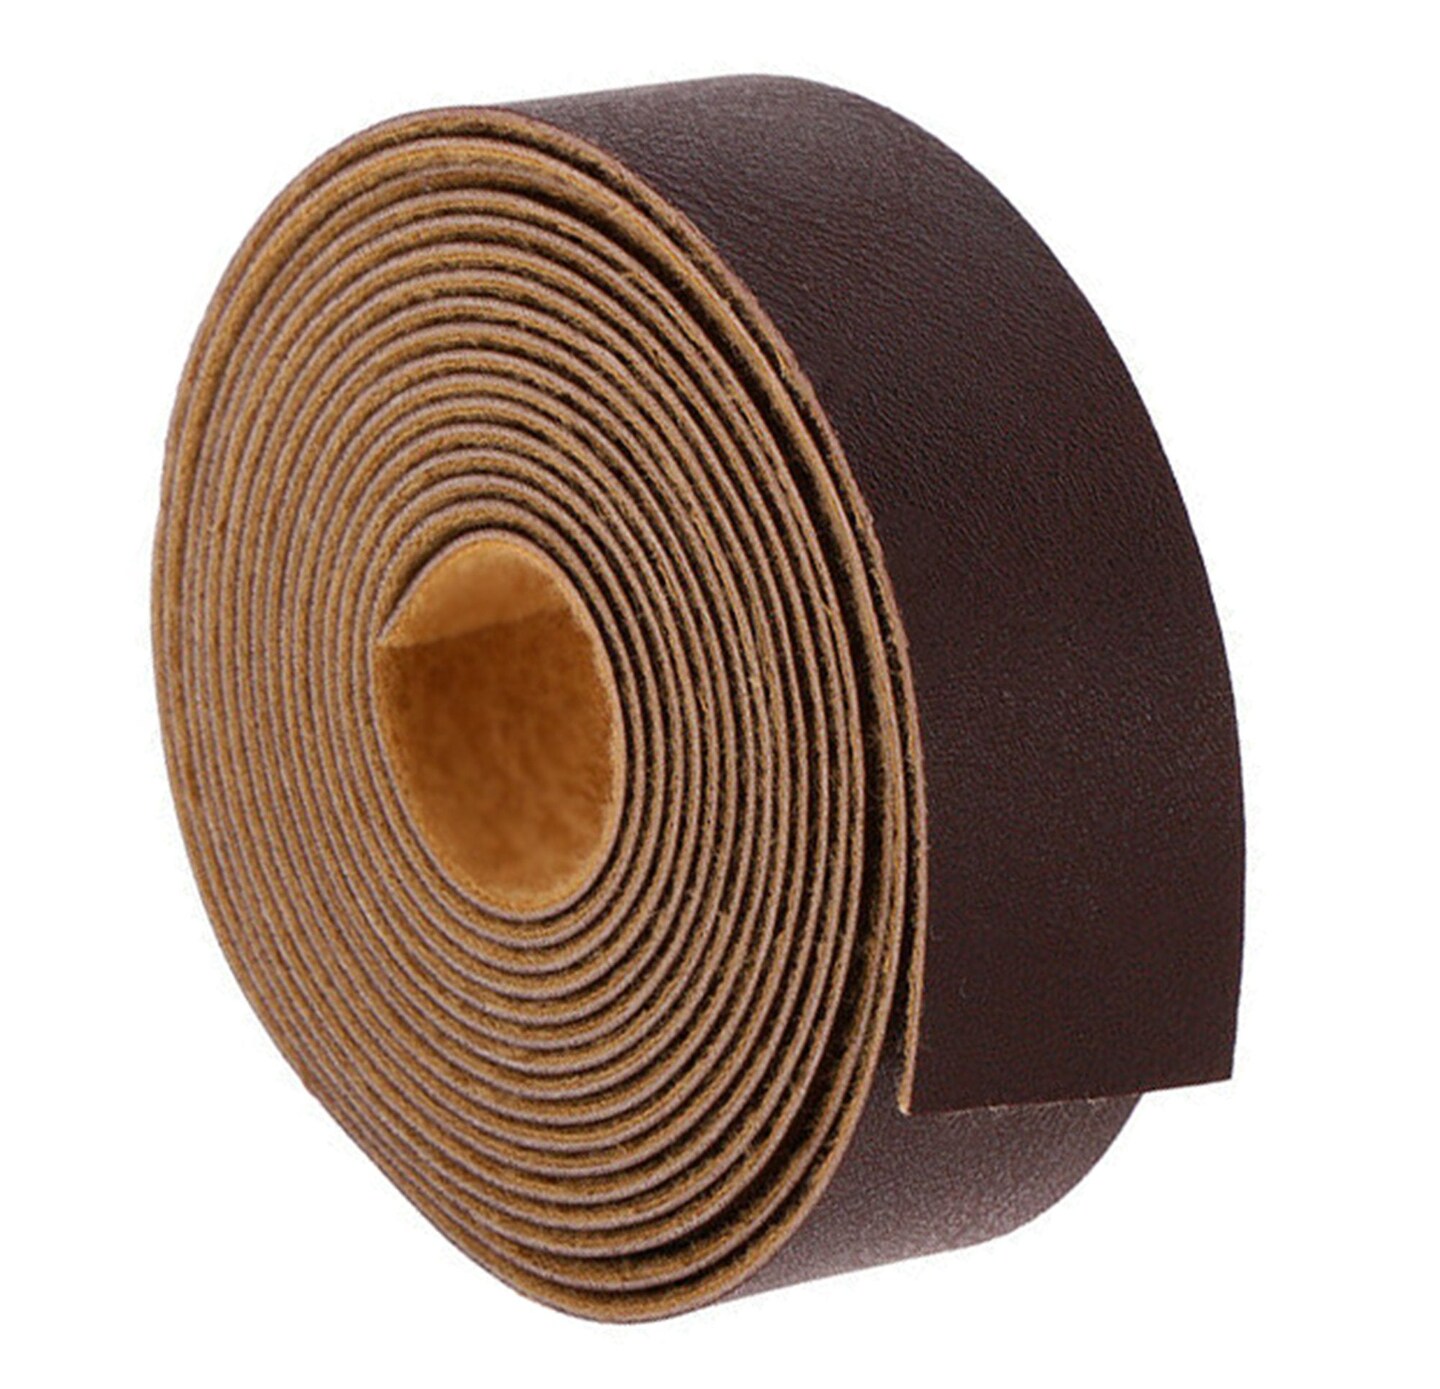 ELW Brown Latigo Leather 9-10oz (3.6-4mm) Straps, Belts, Strips 1/2&#x22; to 4&#x22; Wide and 72&#x22; or 84&#x22; Long Full Grain Leather Cowhide Tooling Leather Heavy Weight